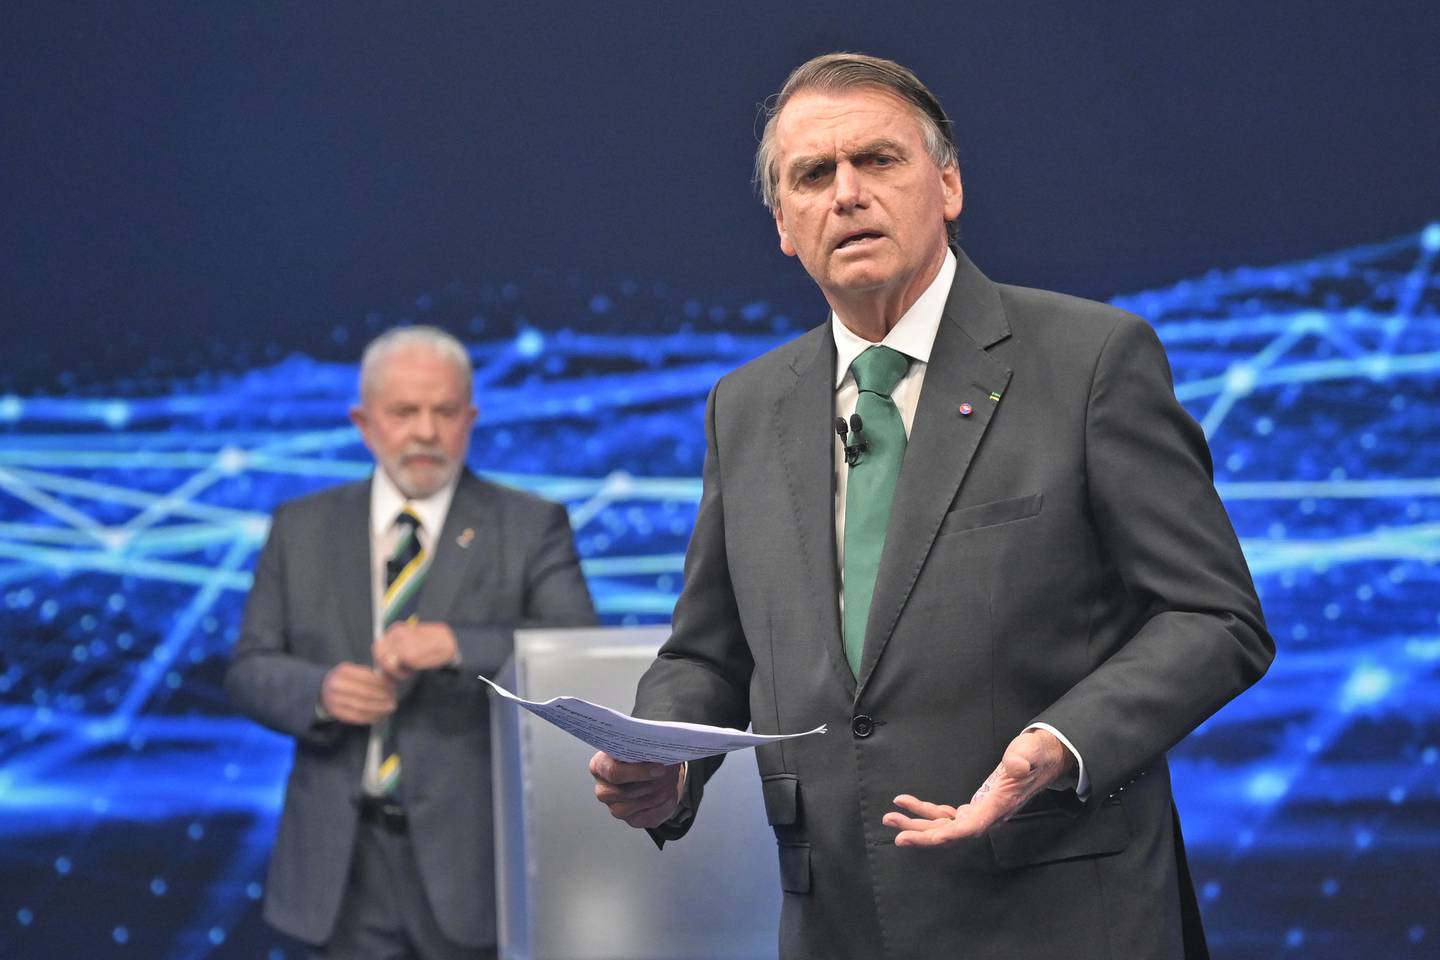 Bolsonaro said the 'Auxílio Brasil' aid package for low-income families would be maintained at 600 reais. dfd